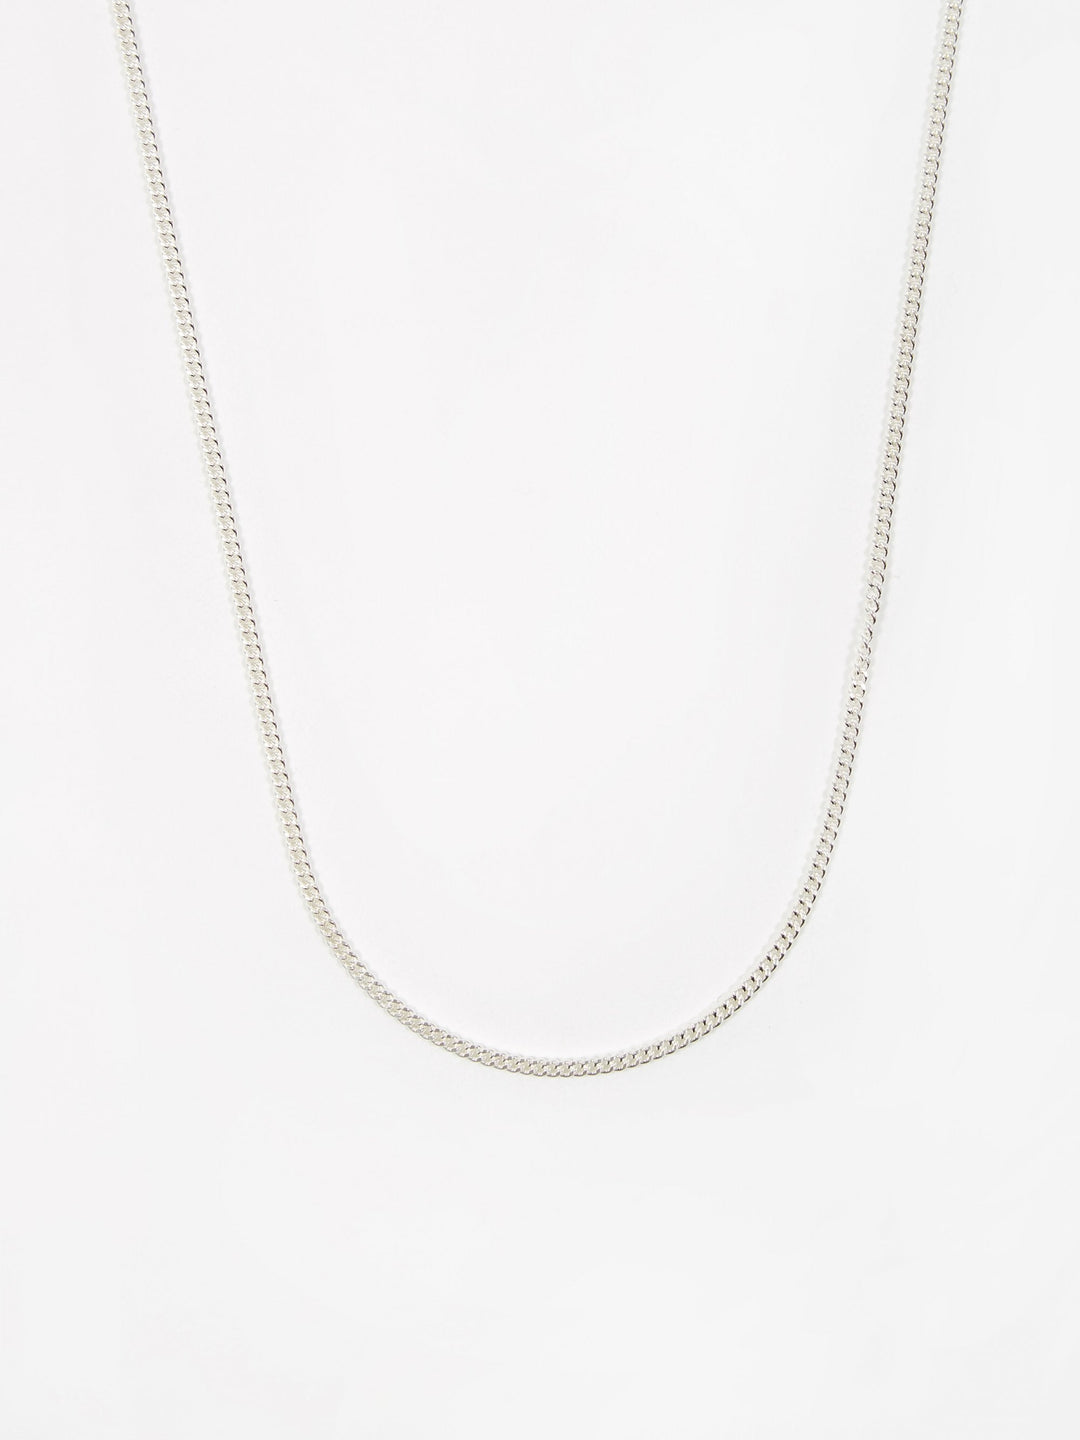 Goods by Goodhood Curb Chain / Silver / 2.1mm Gauge / 50cm - 50cm